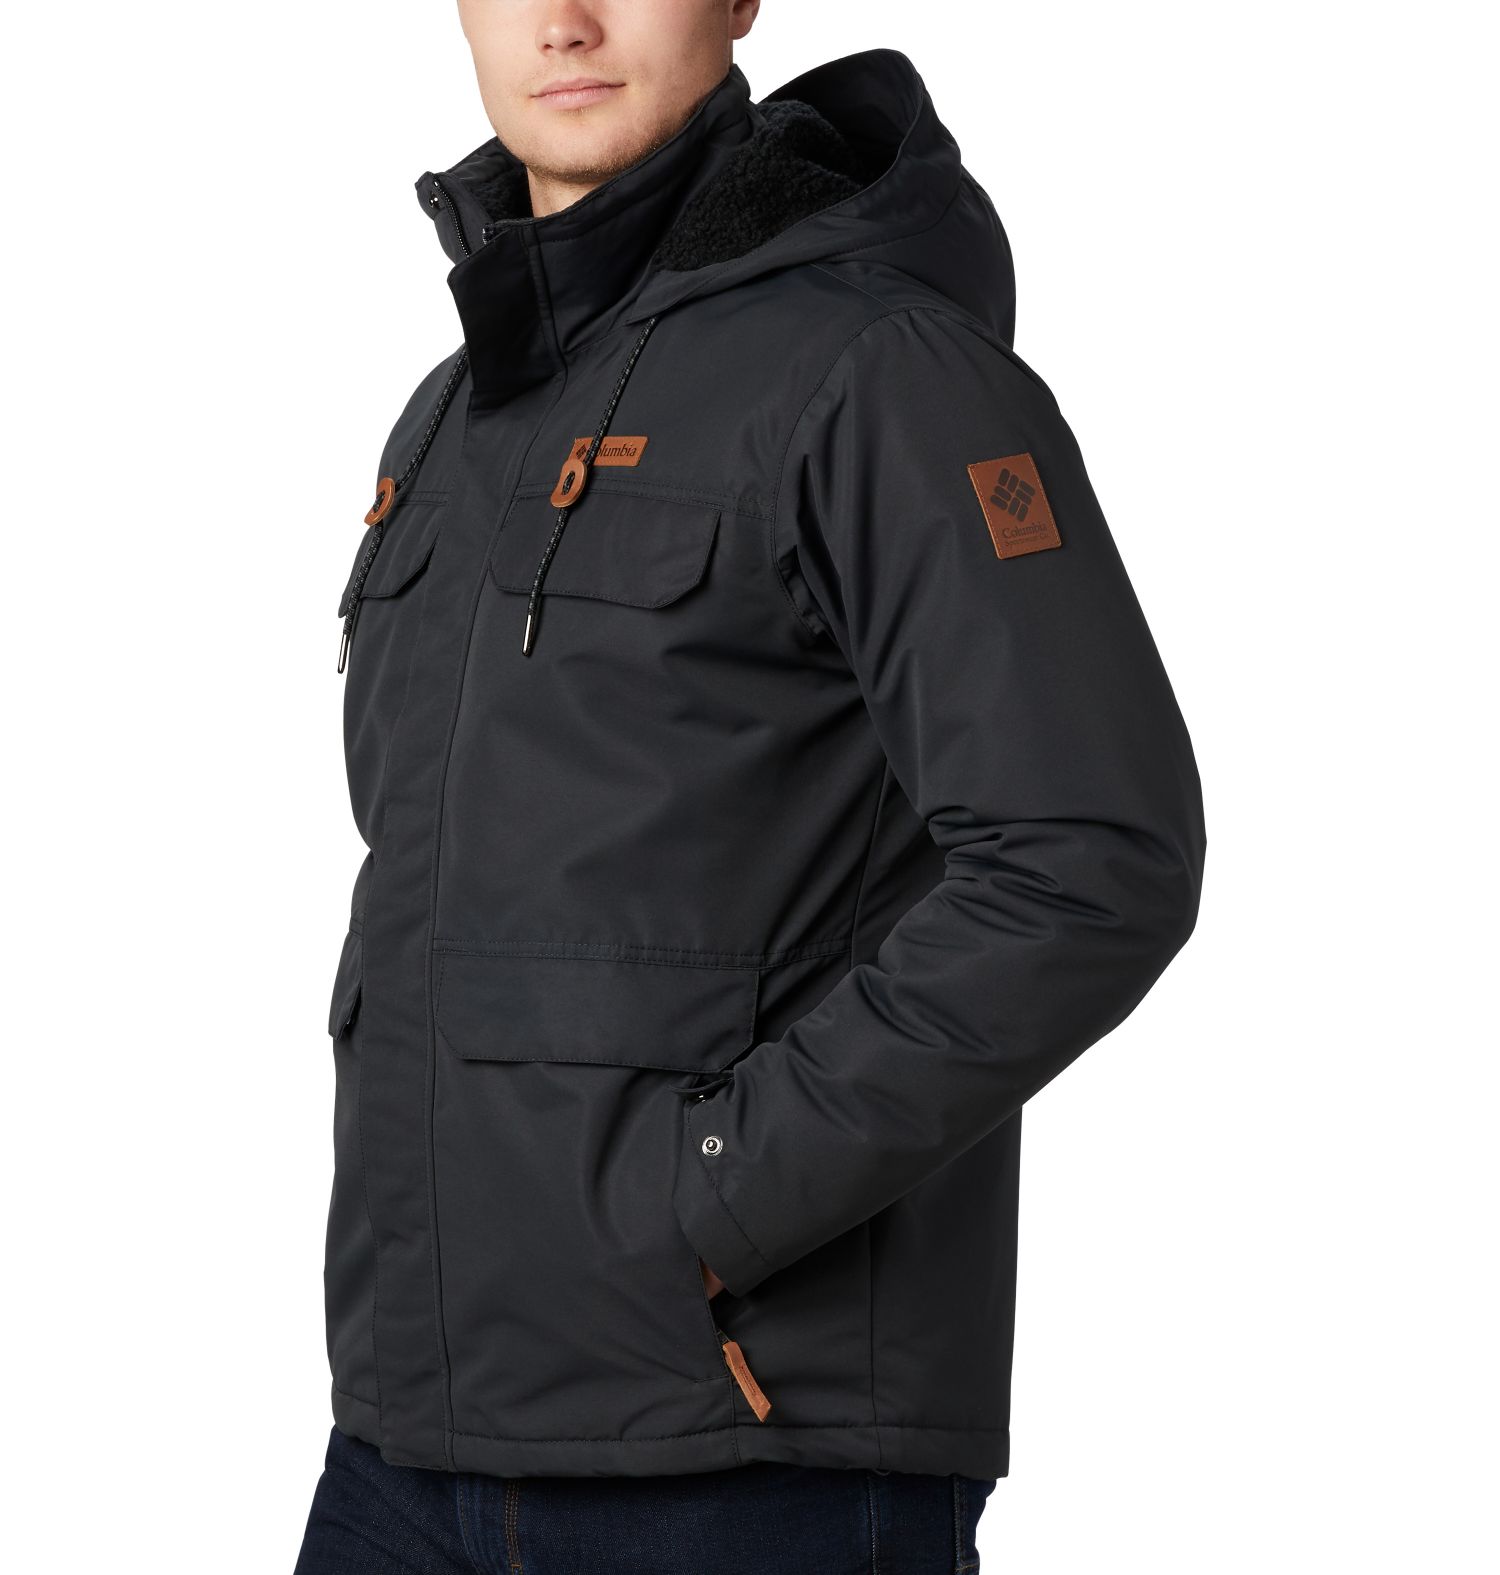 CHAQUETA SOUTH CANYON 80G MICROTEMP XF II 100% POLYESTER Omni-TECH WATERPROOF BREATHABLE BLACK